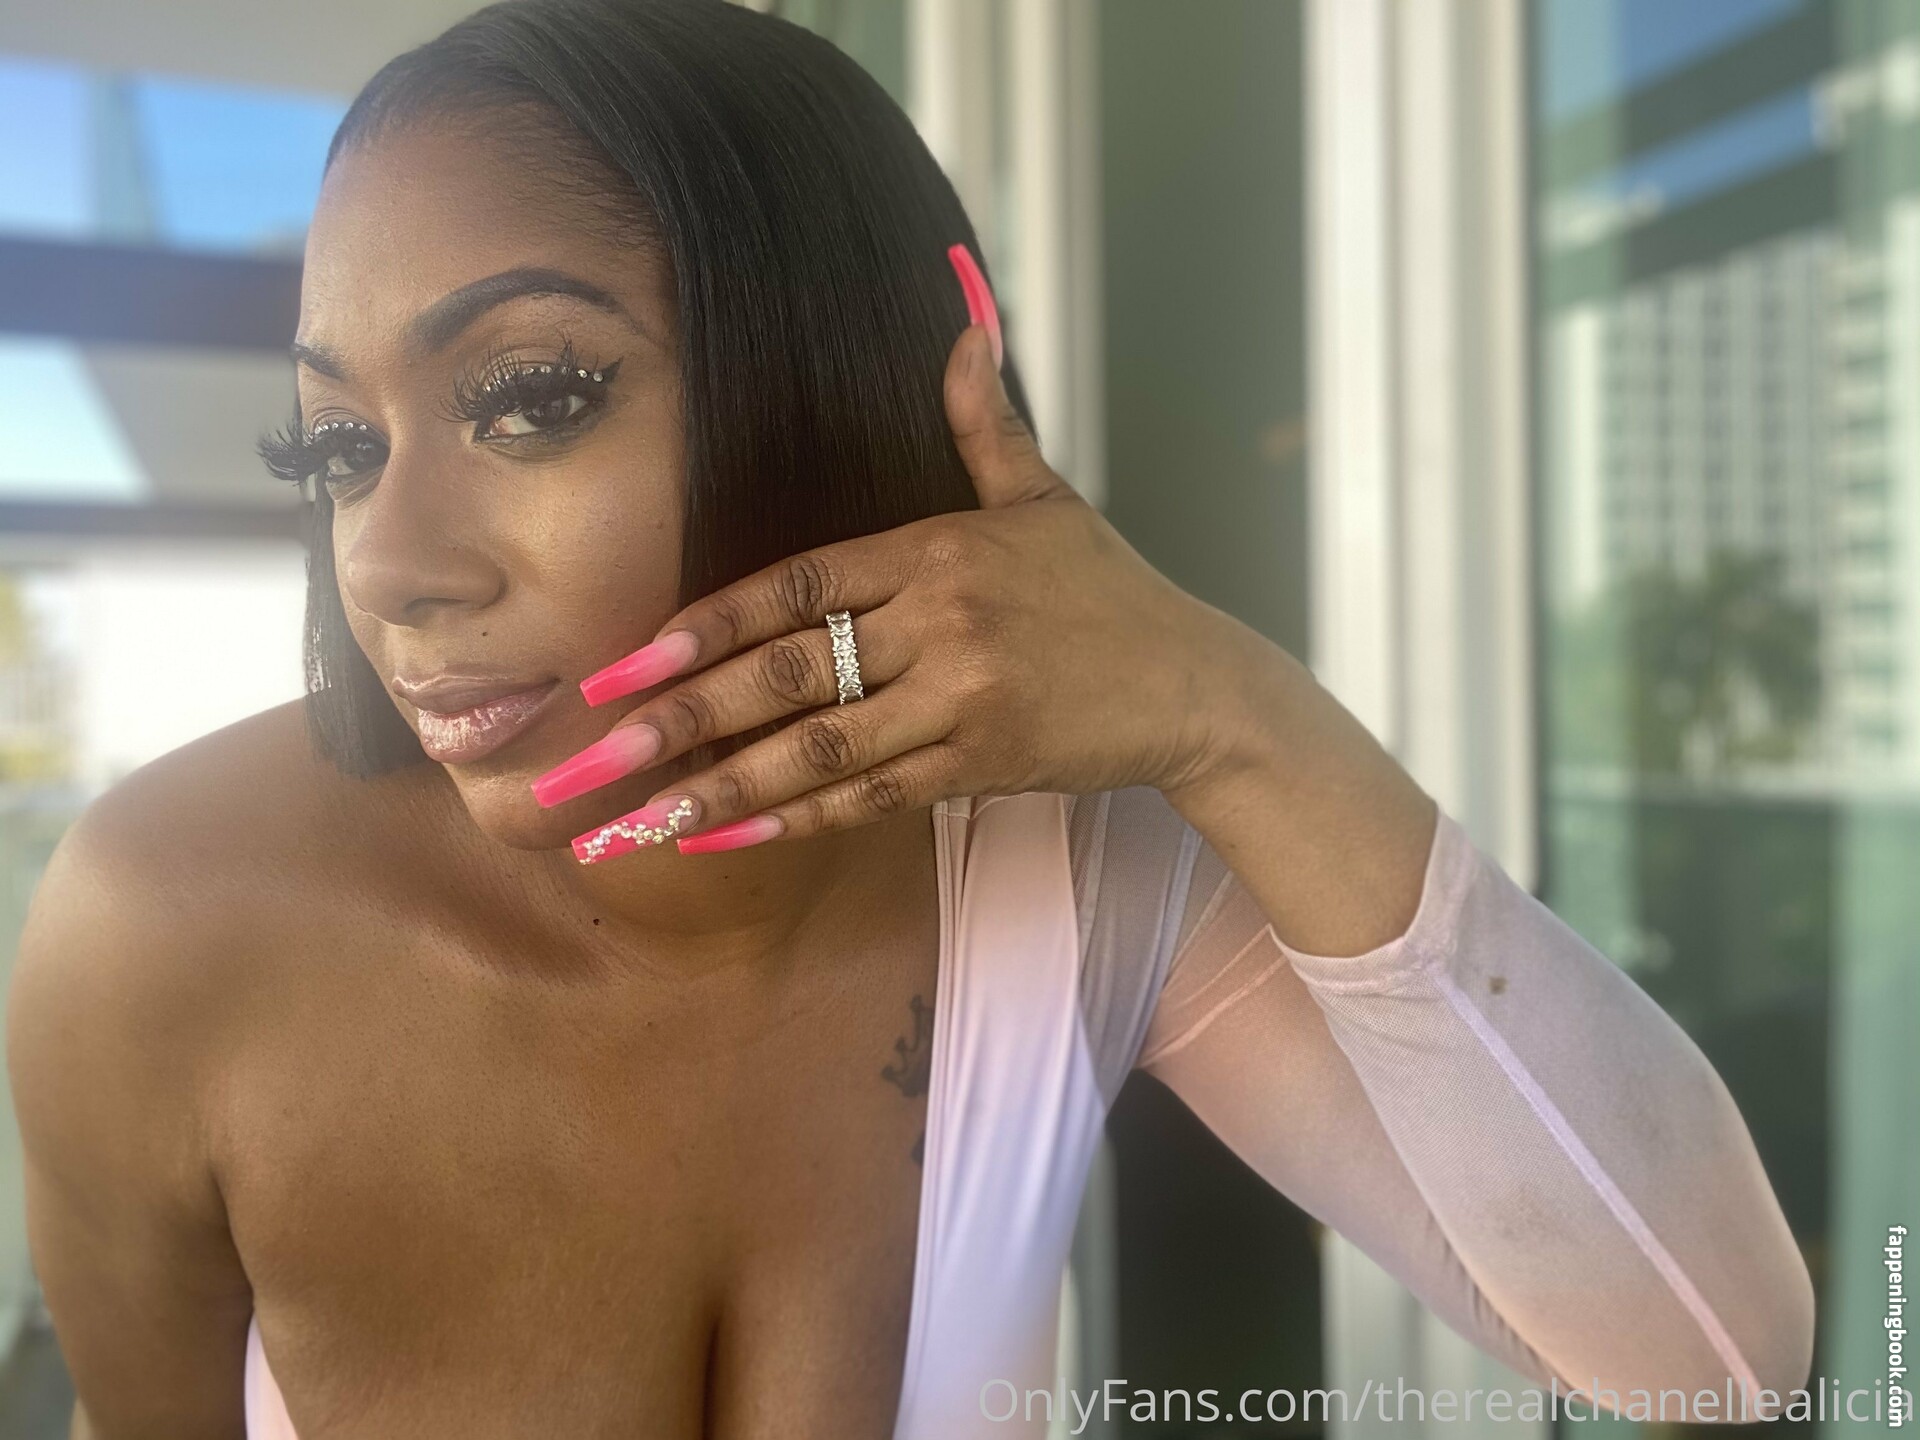 therealchanellealicia Nude OnlyFans Leaks